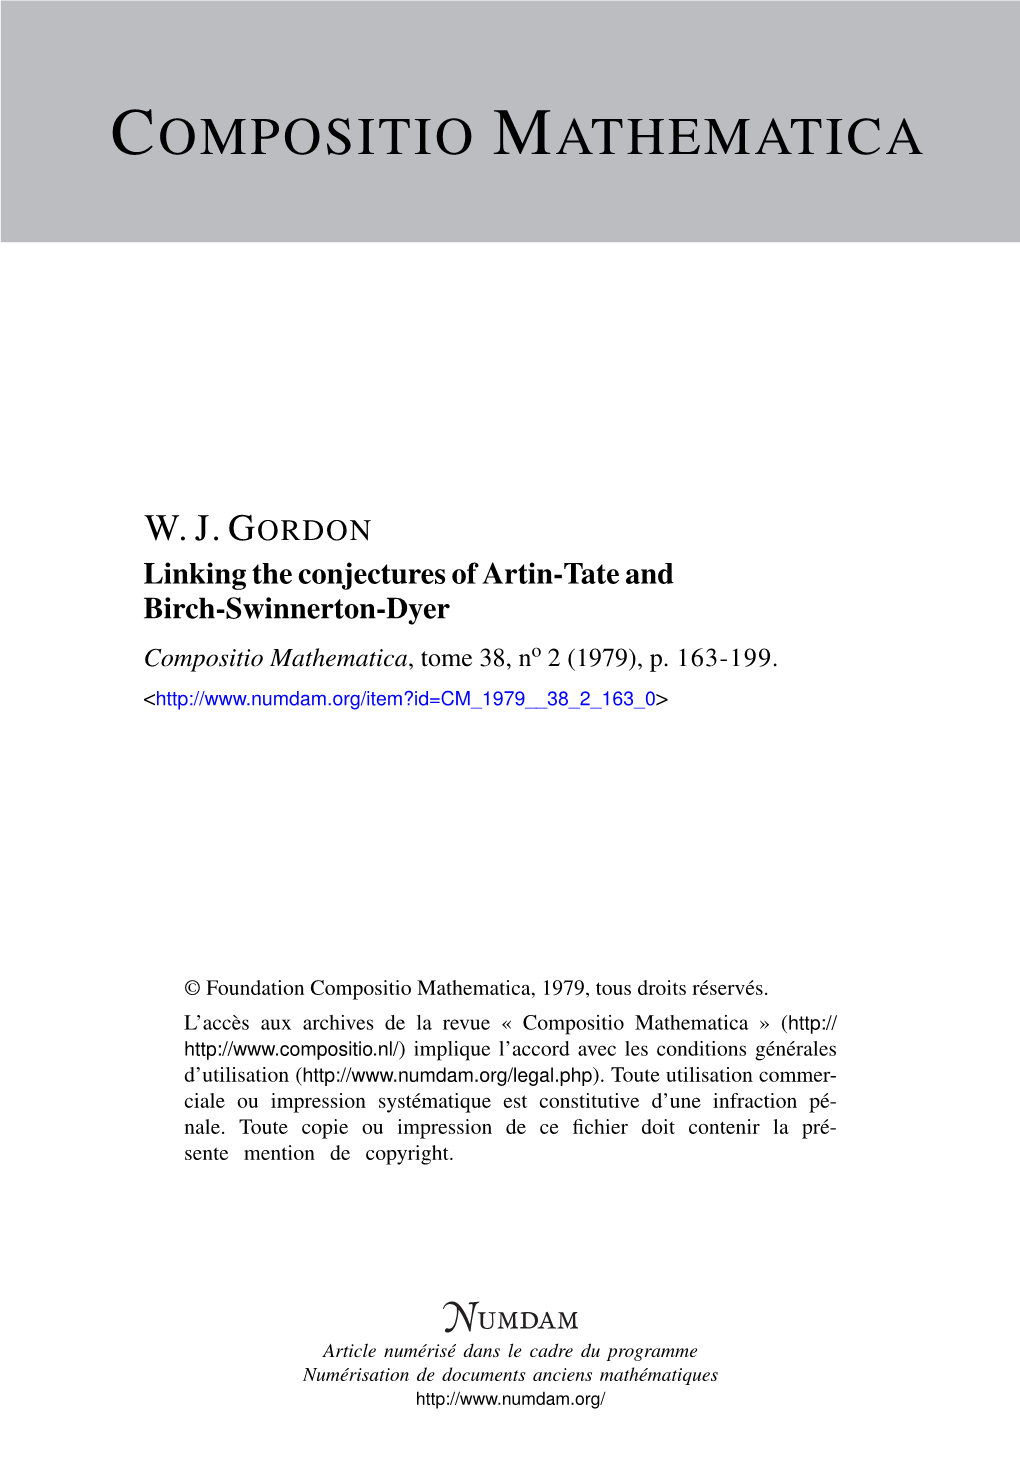 Linking the Conjectures of Artin-Tate and Birch-Swinnerton-Dyer Compositio Mathematica, Tome 38, No 2 (1979), P